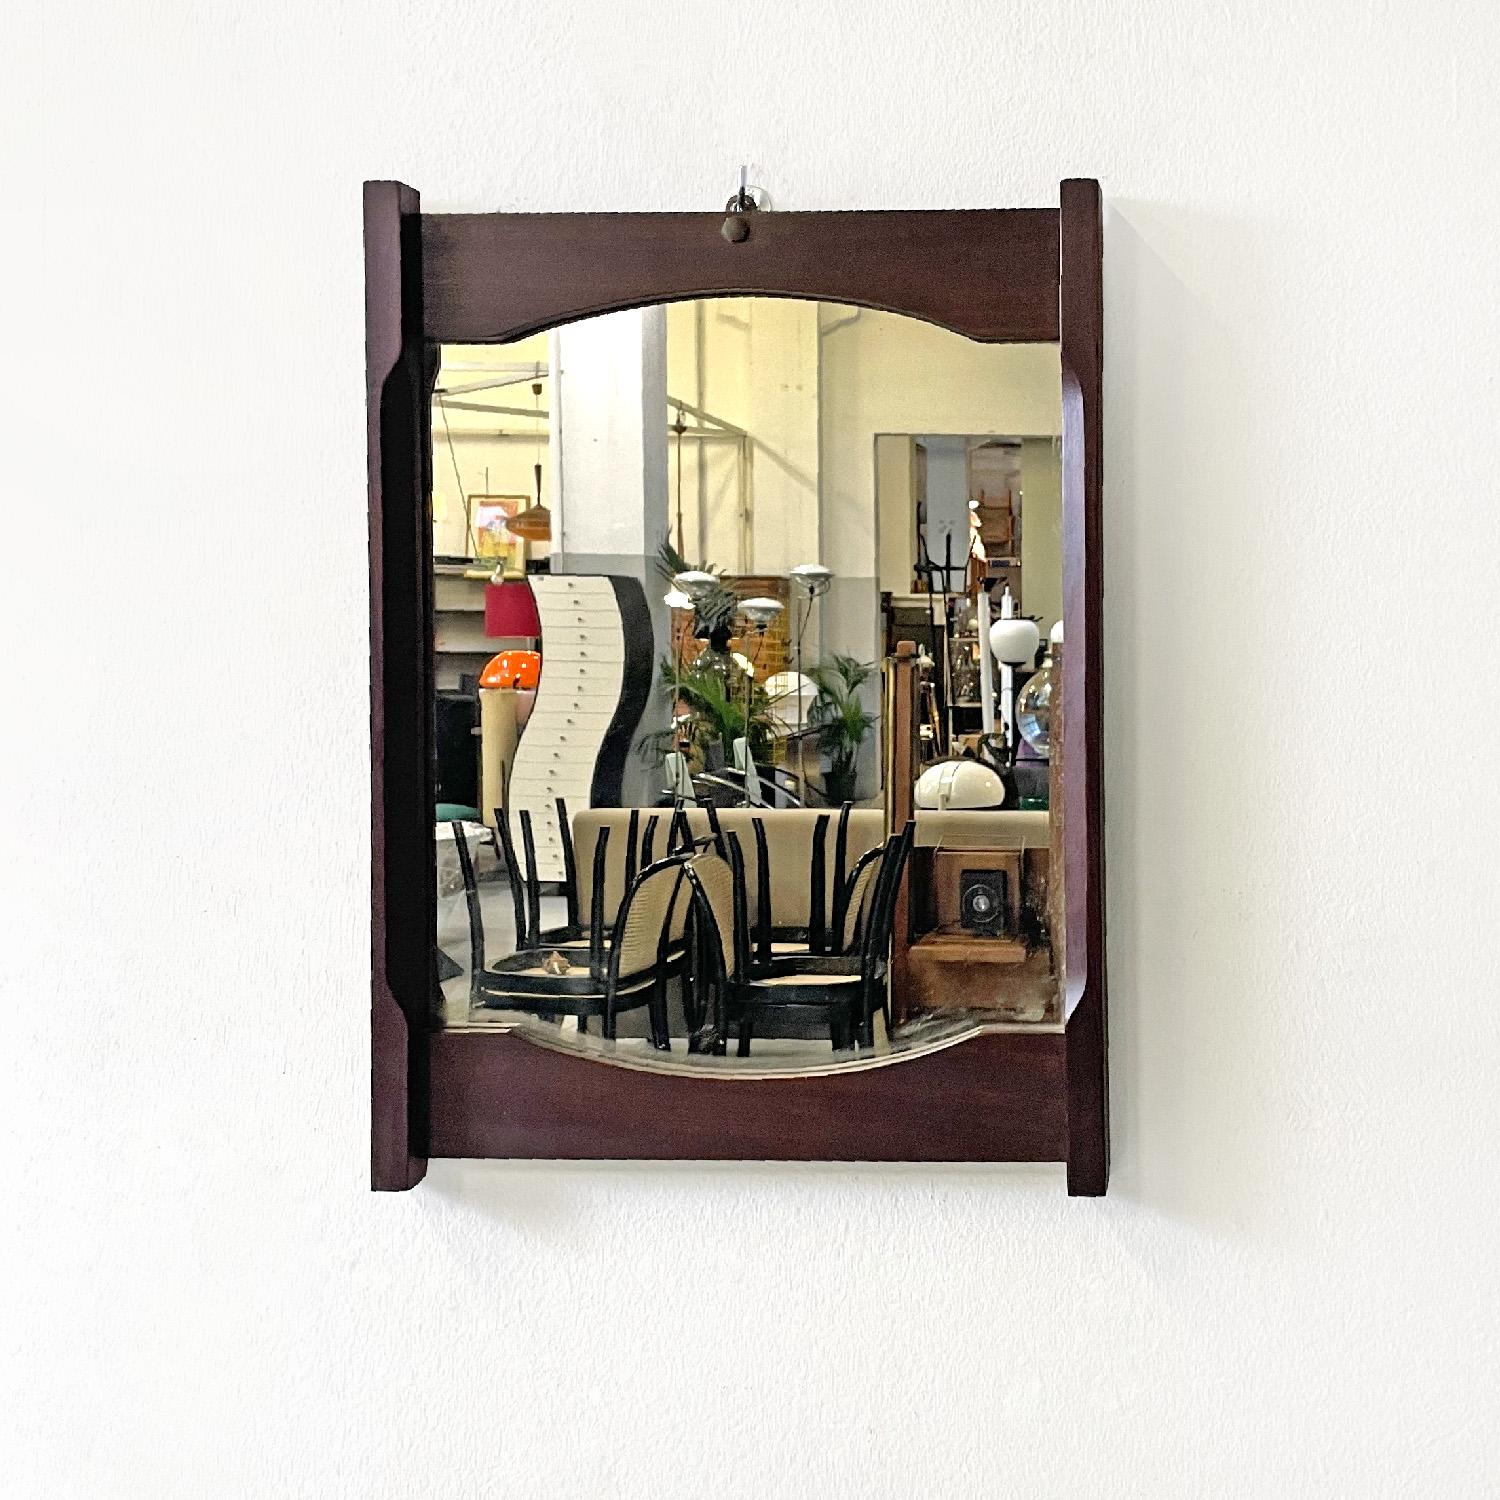 Italian mid-century modern rectangular wooden wall mirror, 1960s
Rectangular wall mirror. The structure is in dark wood, on the sides it has two slats slightly longer than the central rectangle. In the central internal part, both upper and lower,